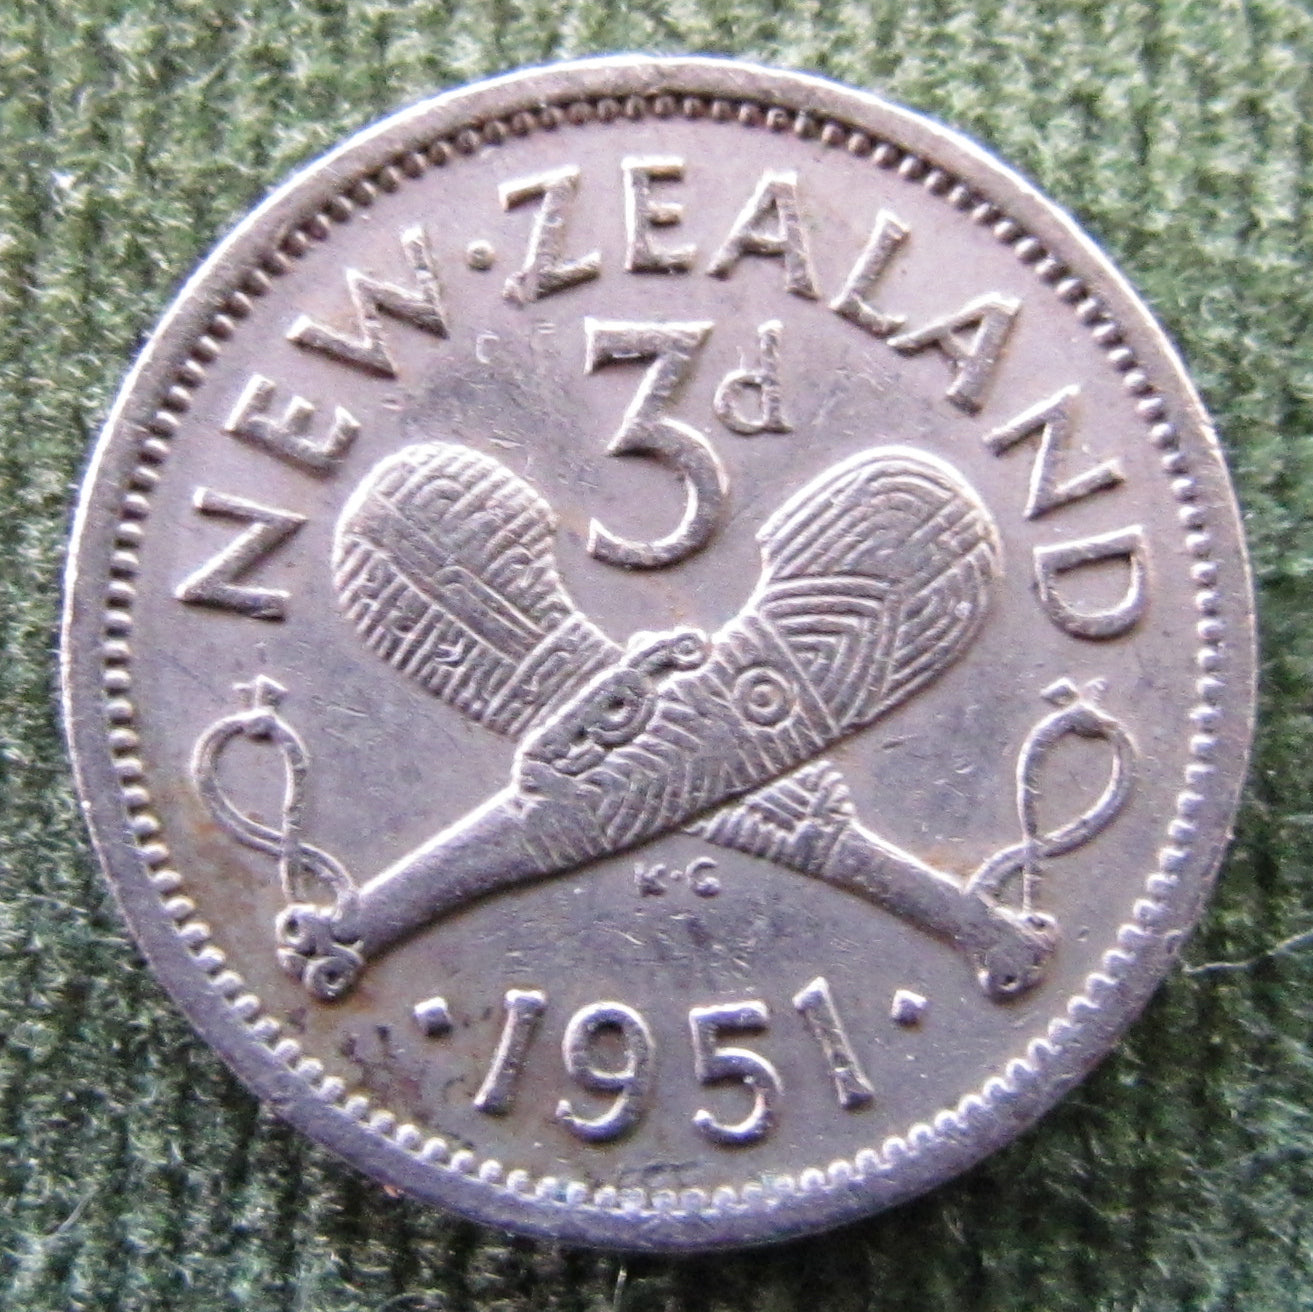 New Zealand 1951 Threepence King George VI Coin